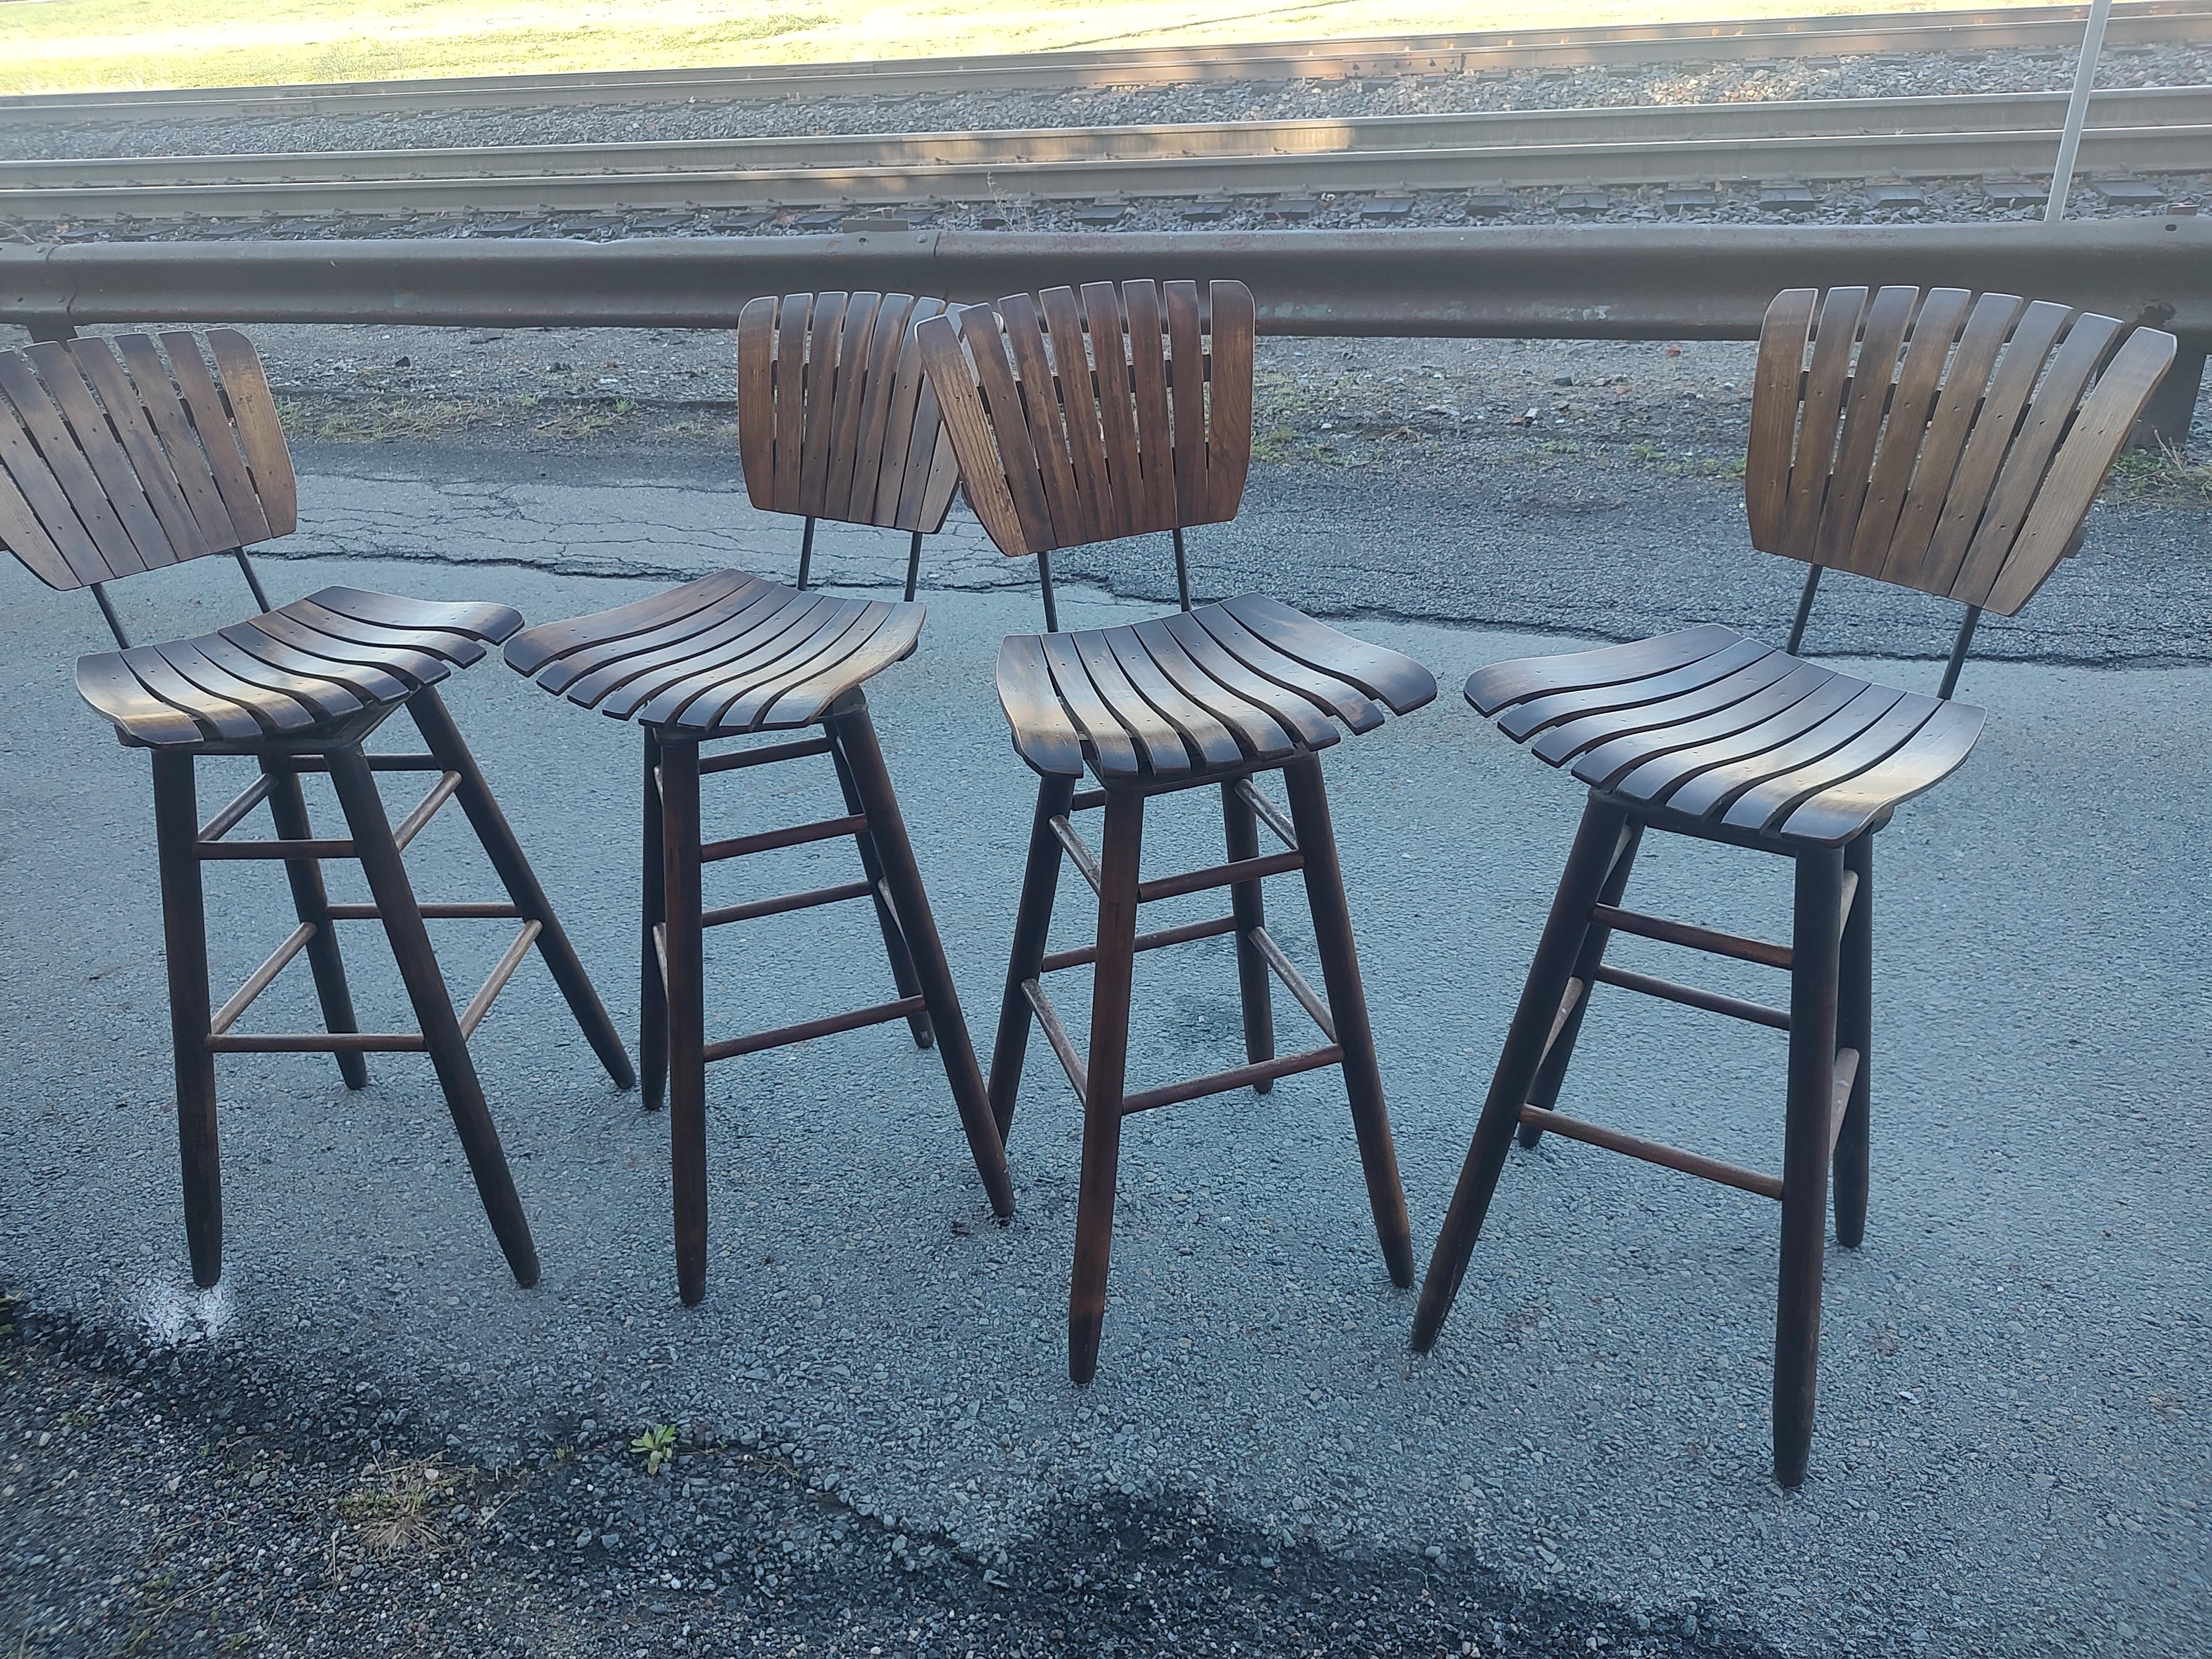 Set of four wood Slatted bar/counter stools with a seat height of 30 inch. All hardwood with iron connectors brackets for support. Will sell as pairs or all four together. In excellent vintage condition with minimal wear. All swivel. Priced